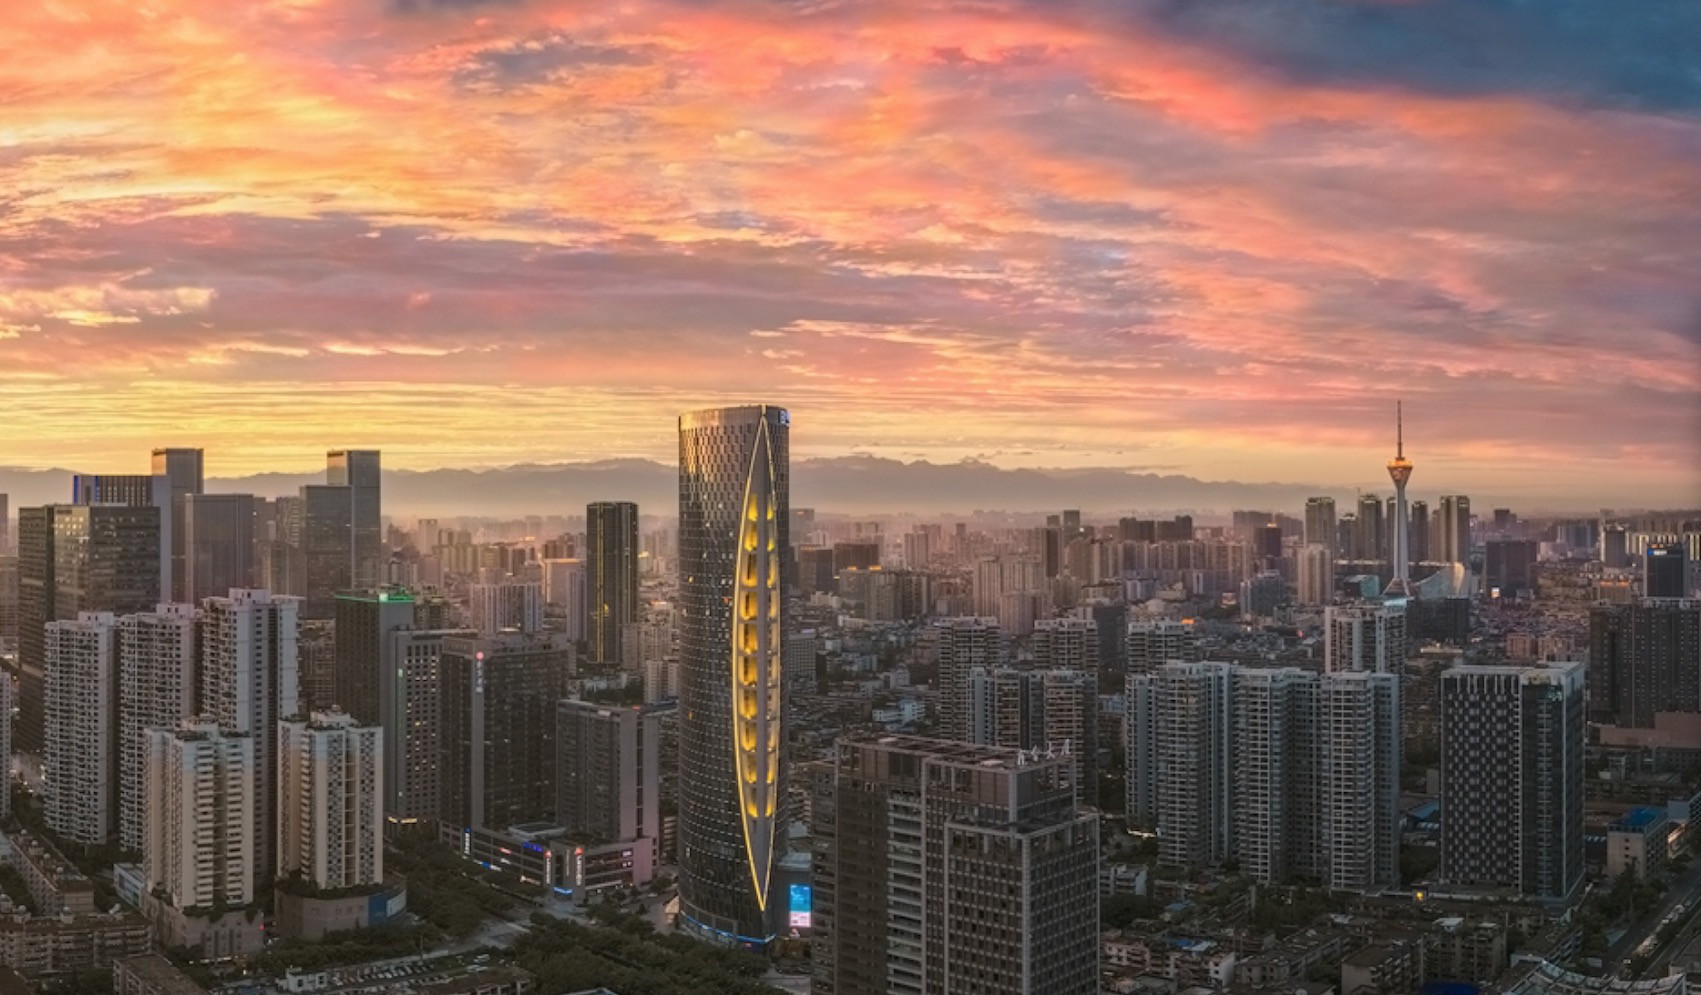 Chengdu 2021 head of delegations meeting scheduled for April